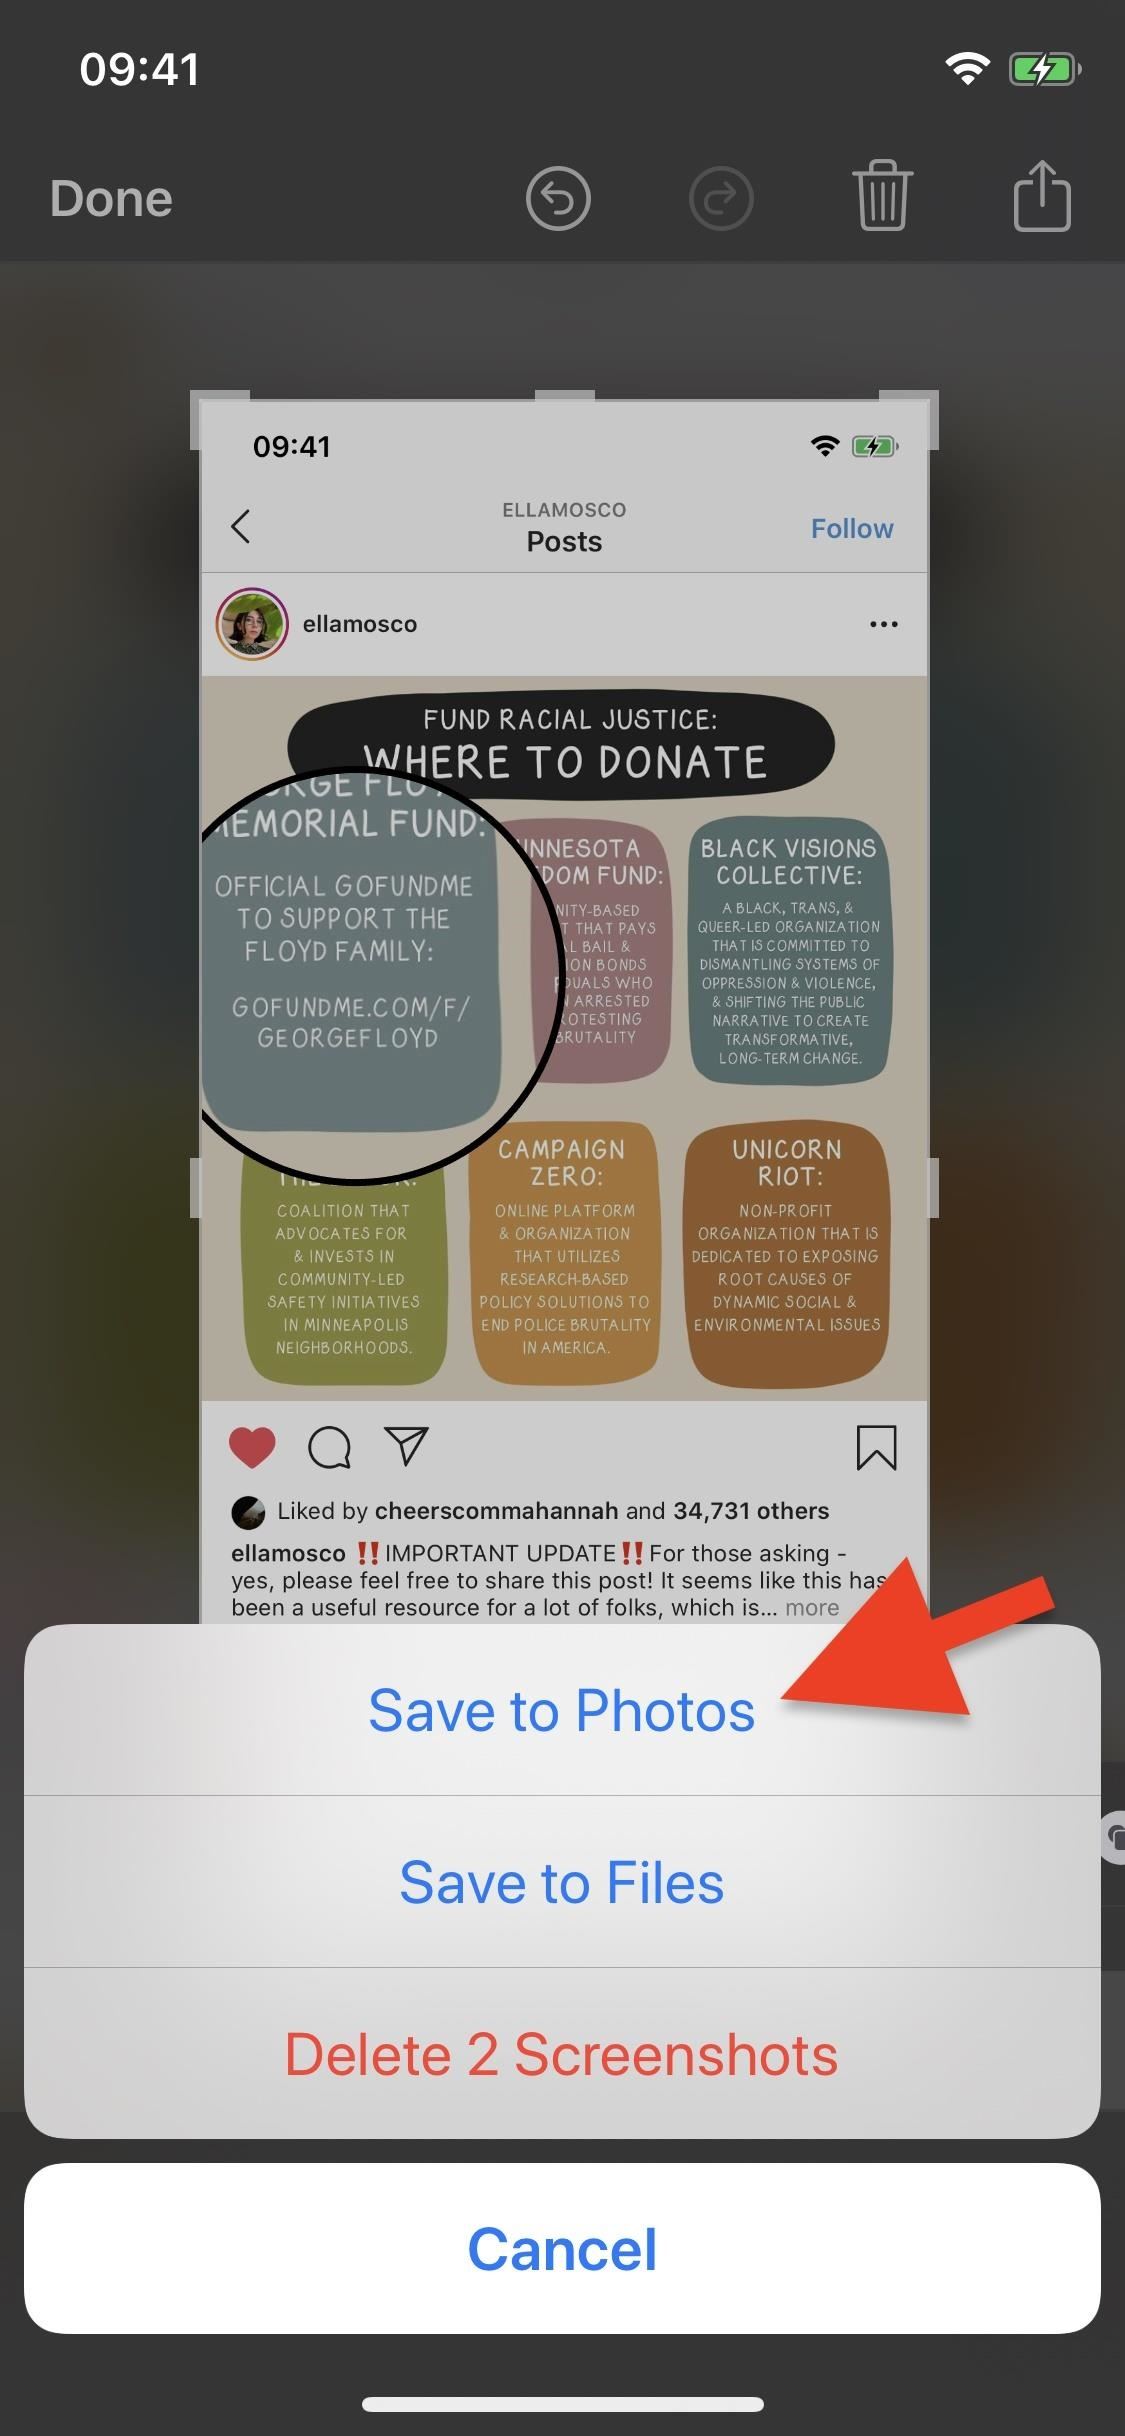 Magnify Details in Screenshots & Photos on Your iPhone to Focus Attention on What Matters